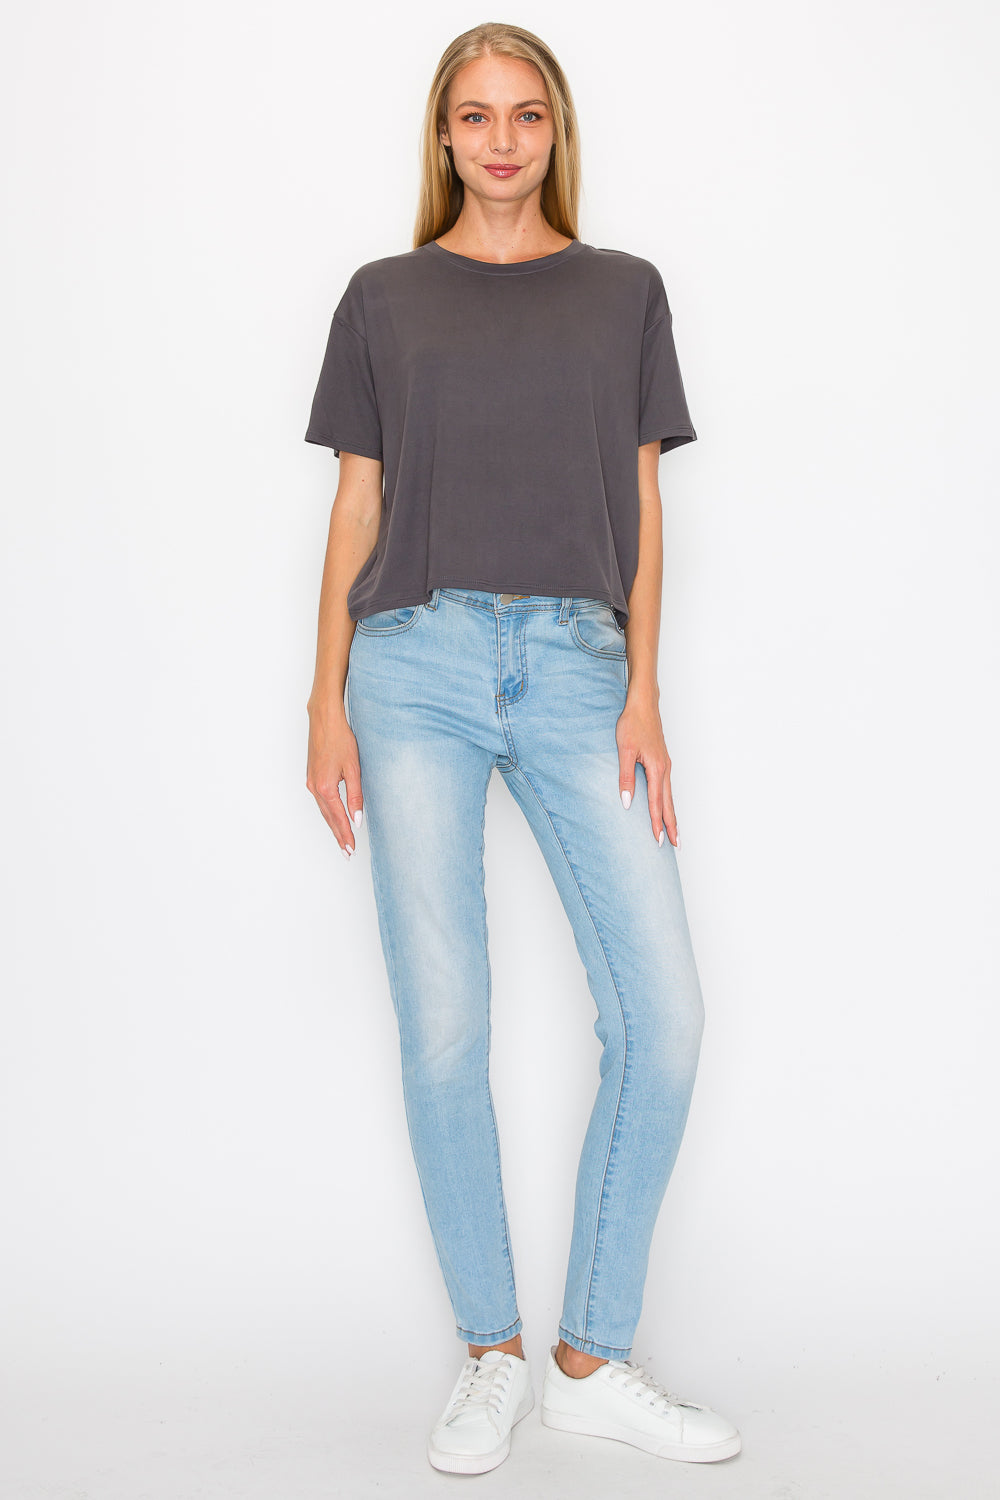 Boxy Short Sleeve Crop Top - Charcoal